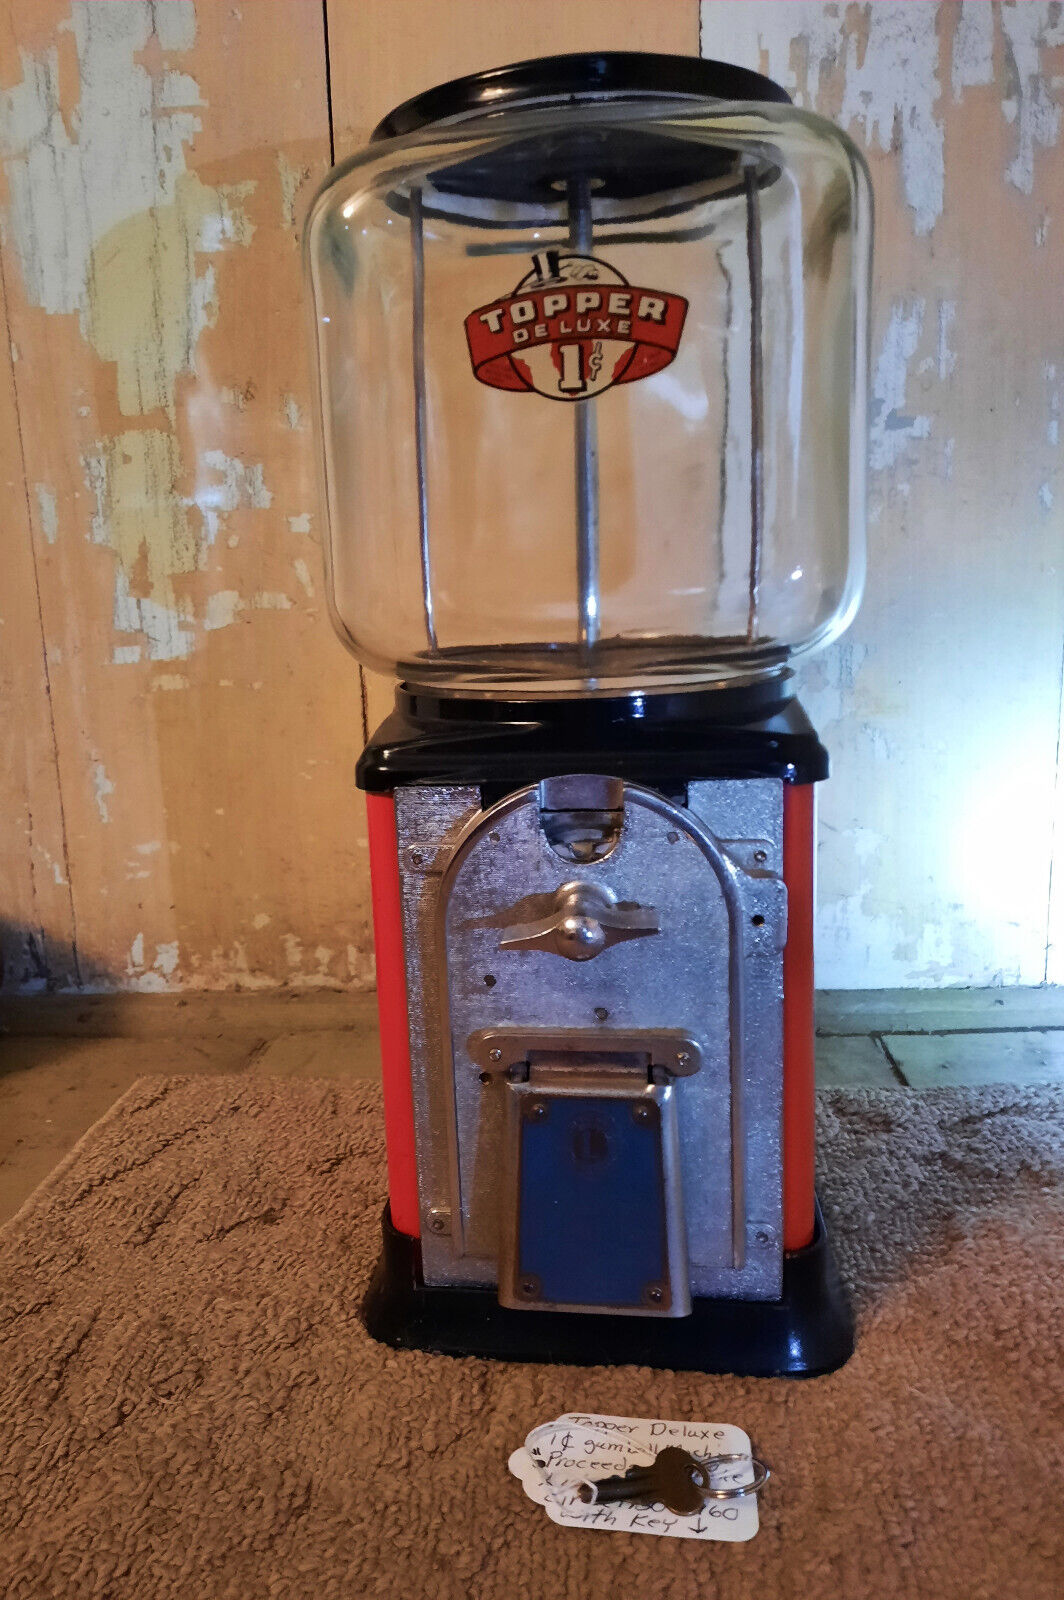 RARE 1930's VICTOR TOPPER 1 Cent Gumball Machine With Key. Works